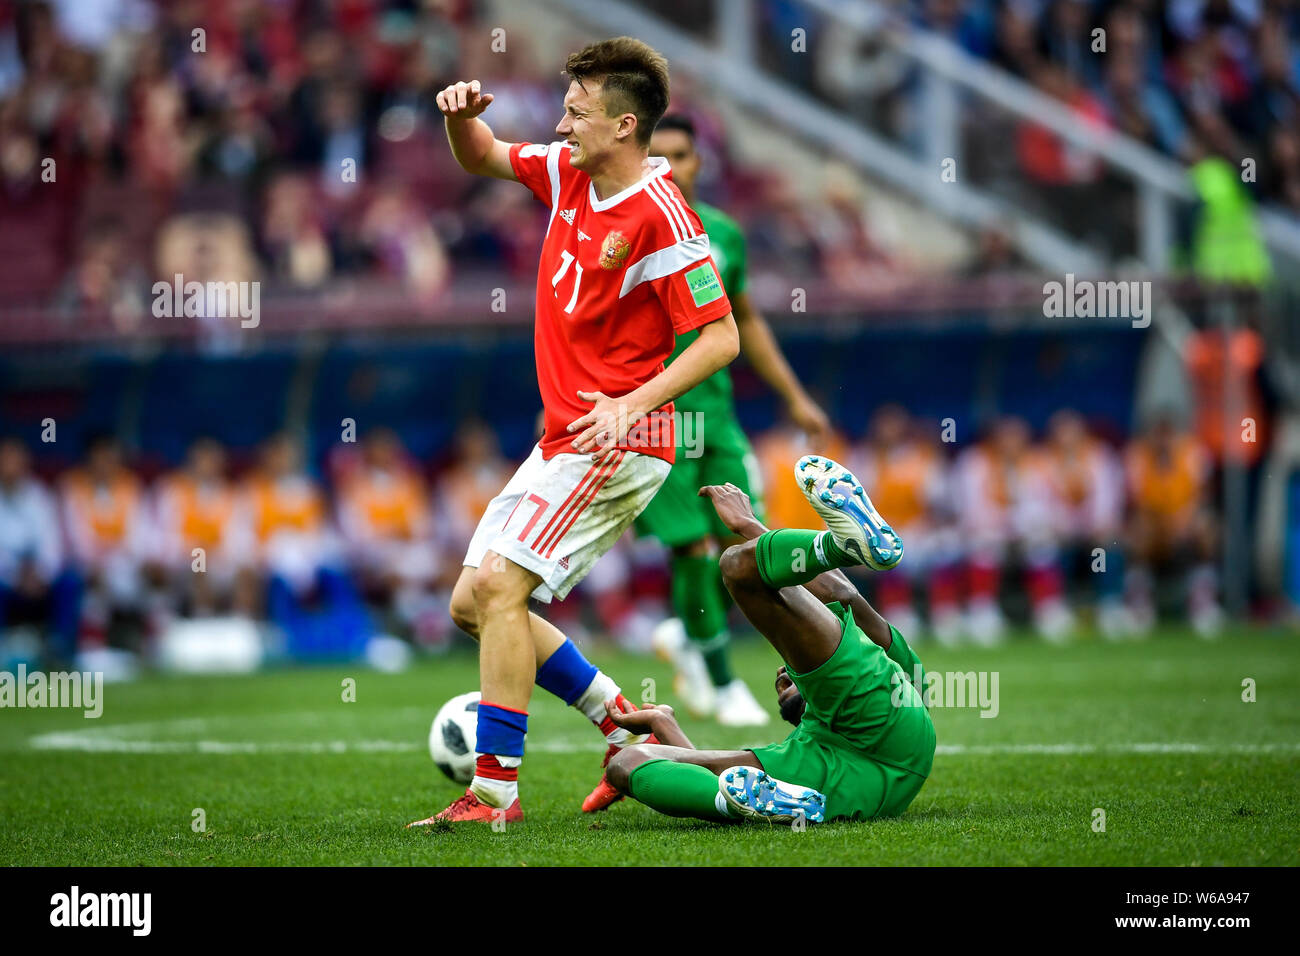 Daler Kuzyayev of Russia, left, challenges a player of Saudi Arabia in their Group A match during the 2018 FIFA World Cup in Moscow, Russia, 14 June 2 Stock Photo